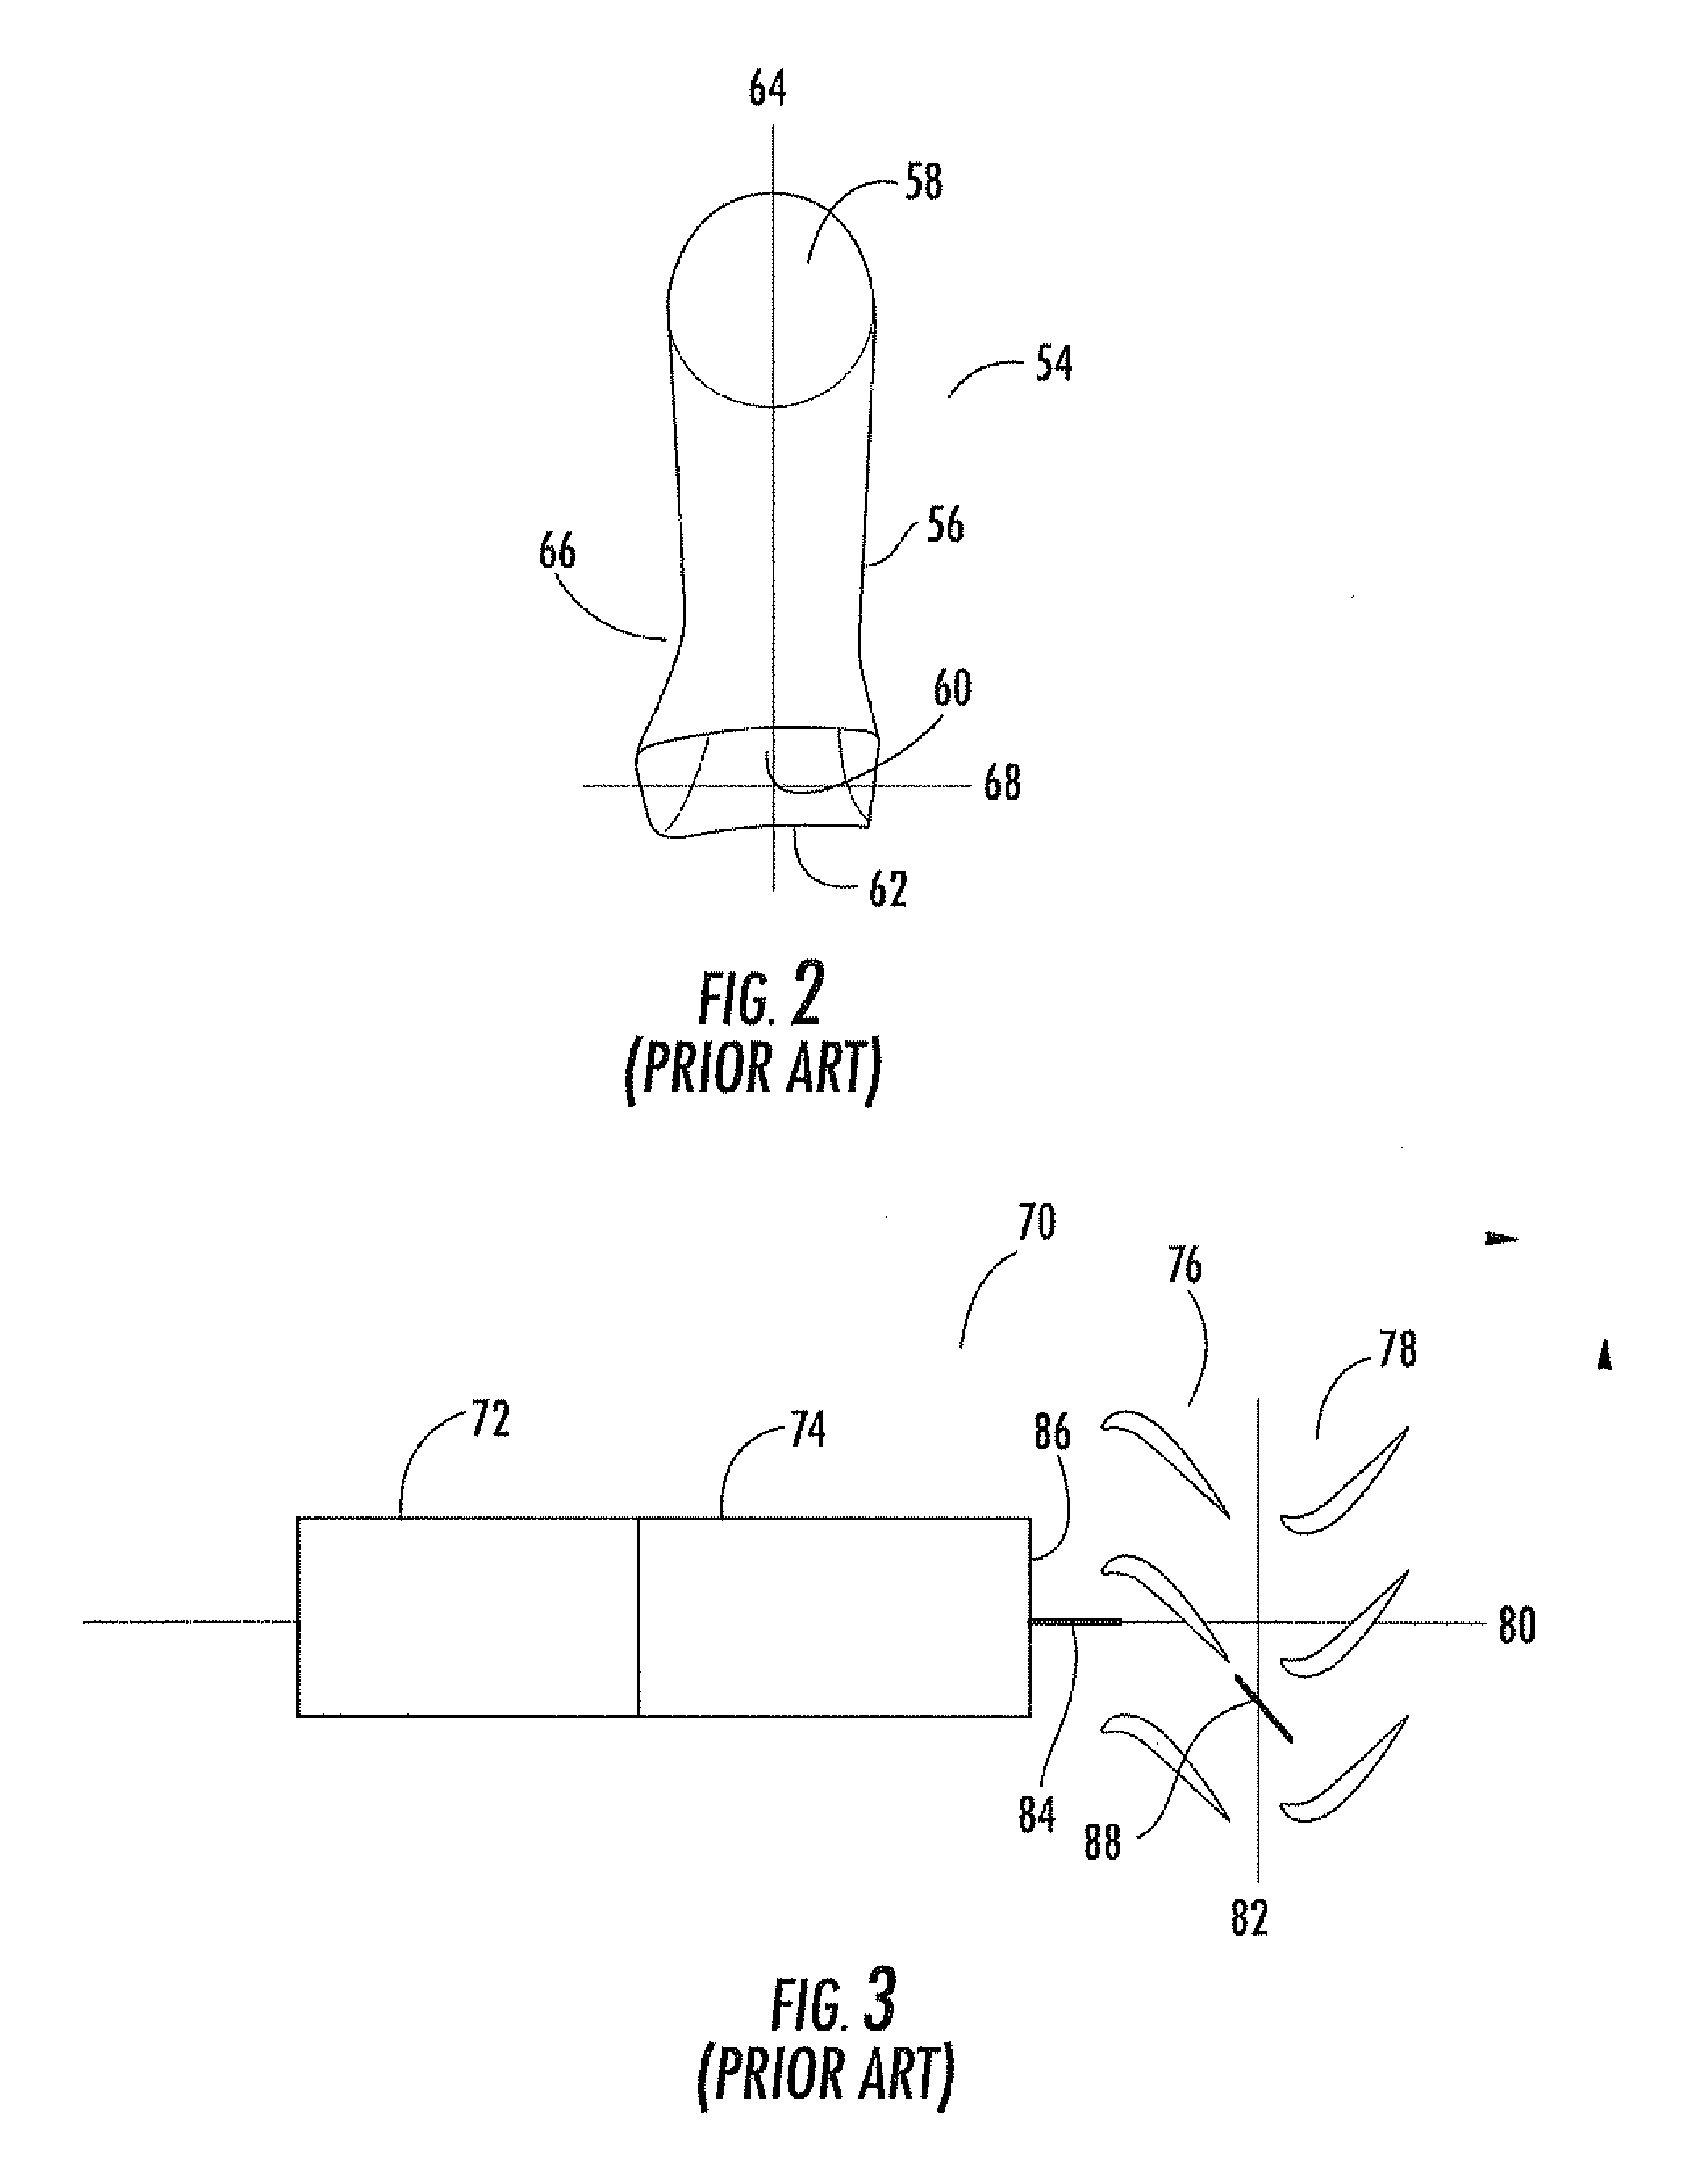 Transition with a linear flow path with exhaust mouths for use in a gas turbine engine